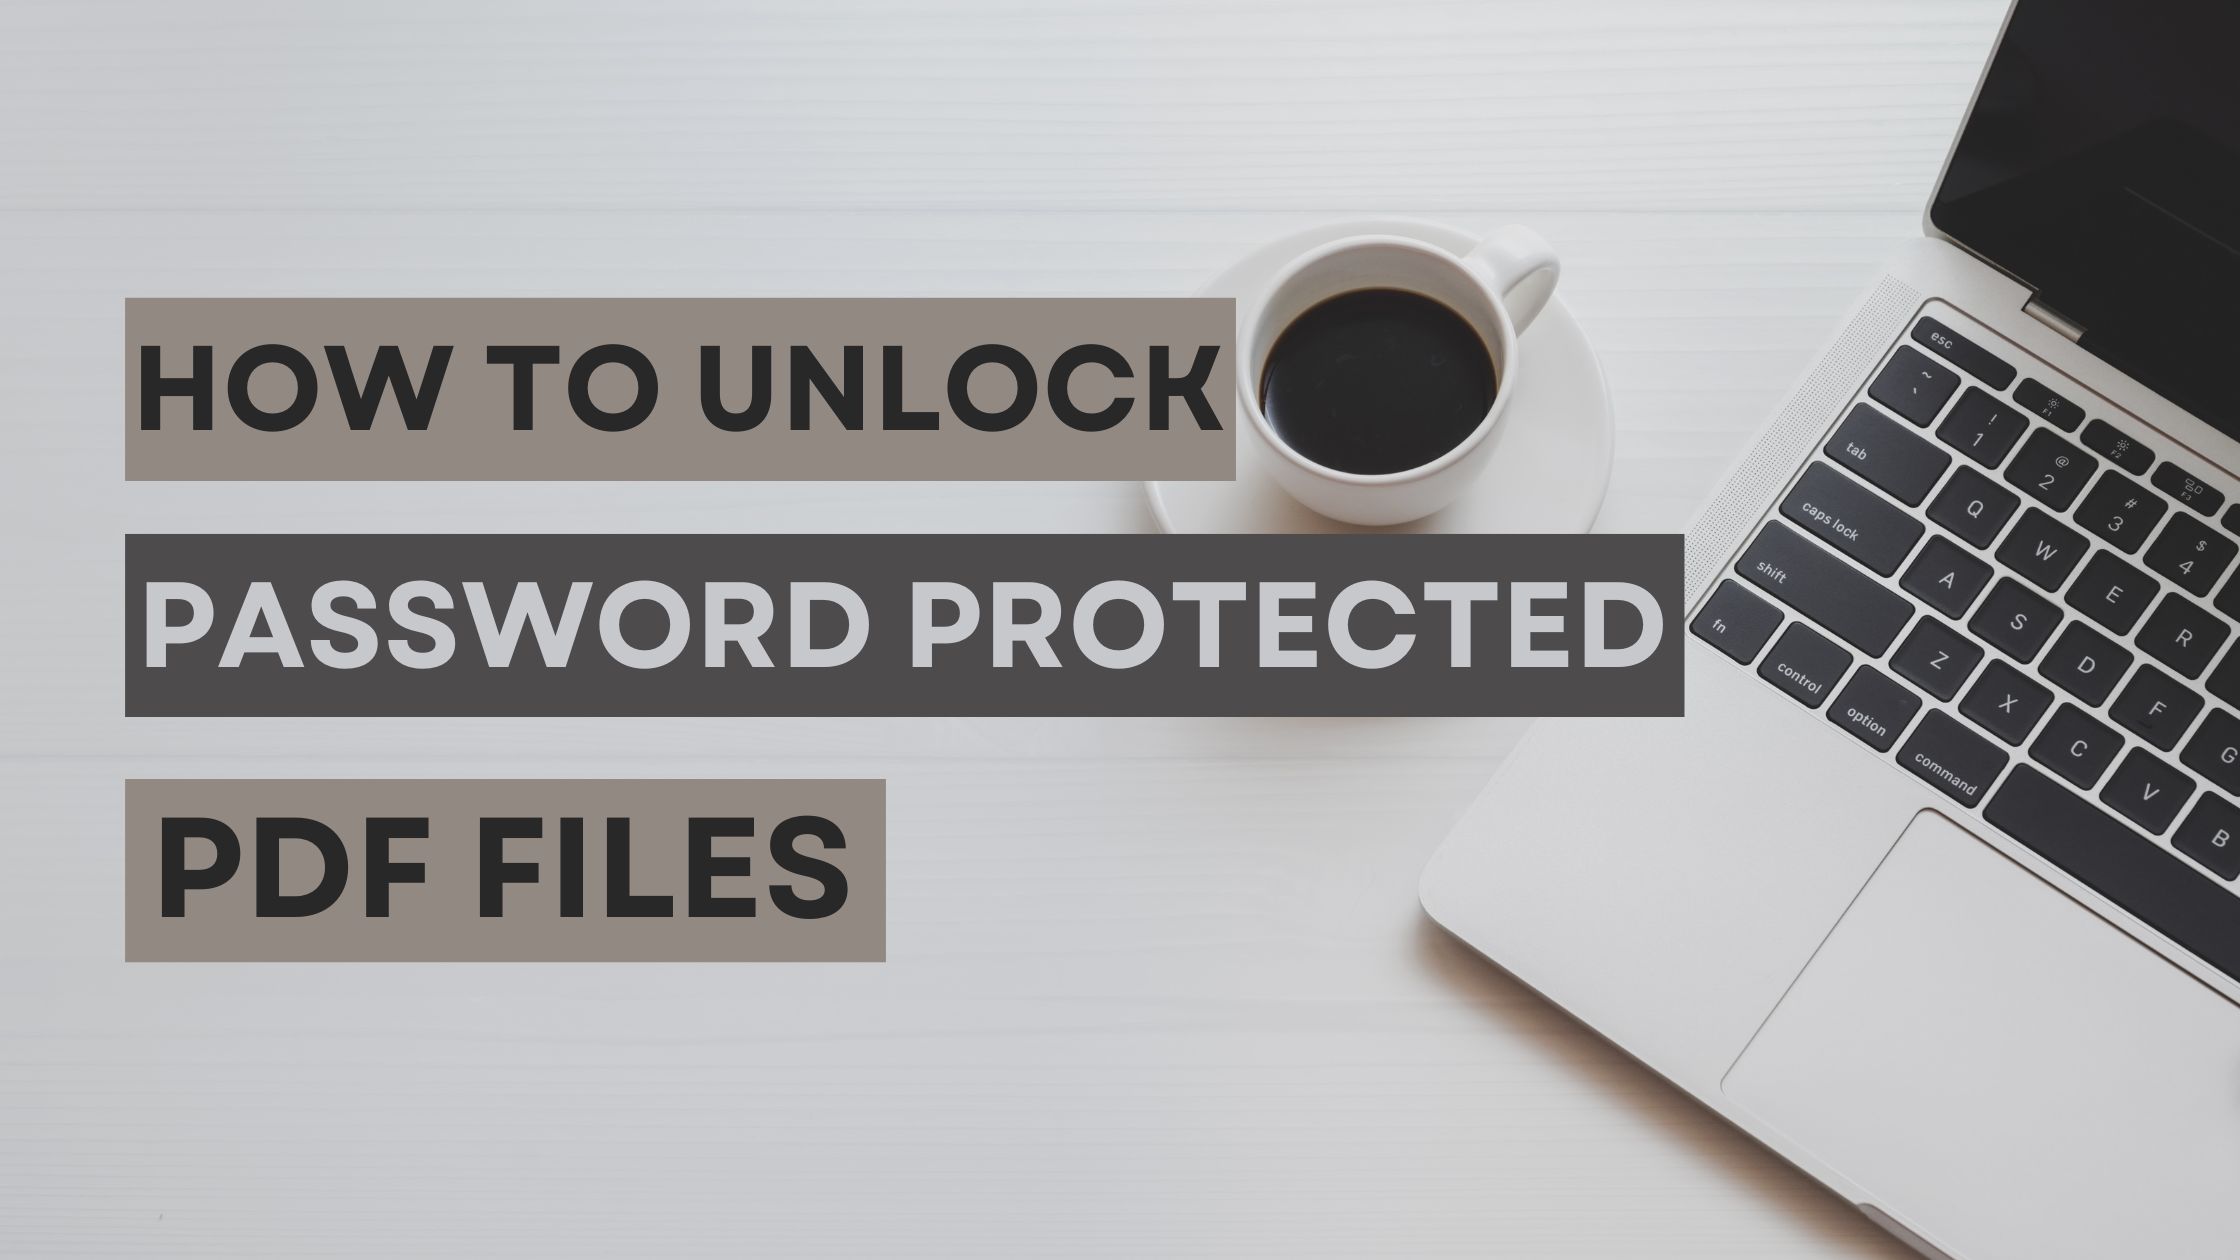 How to Unlock Password Protected PDF Files